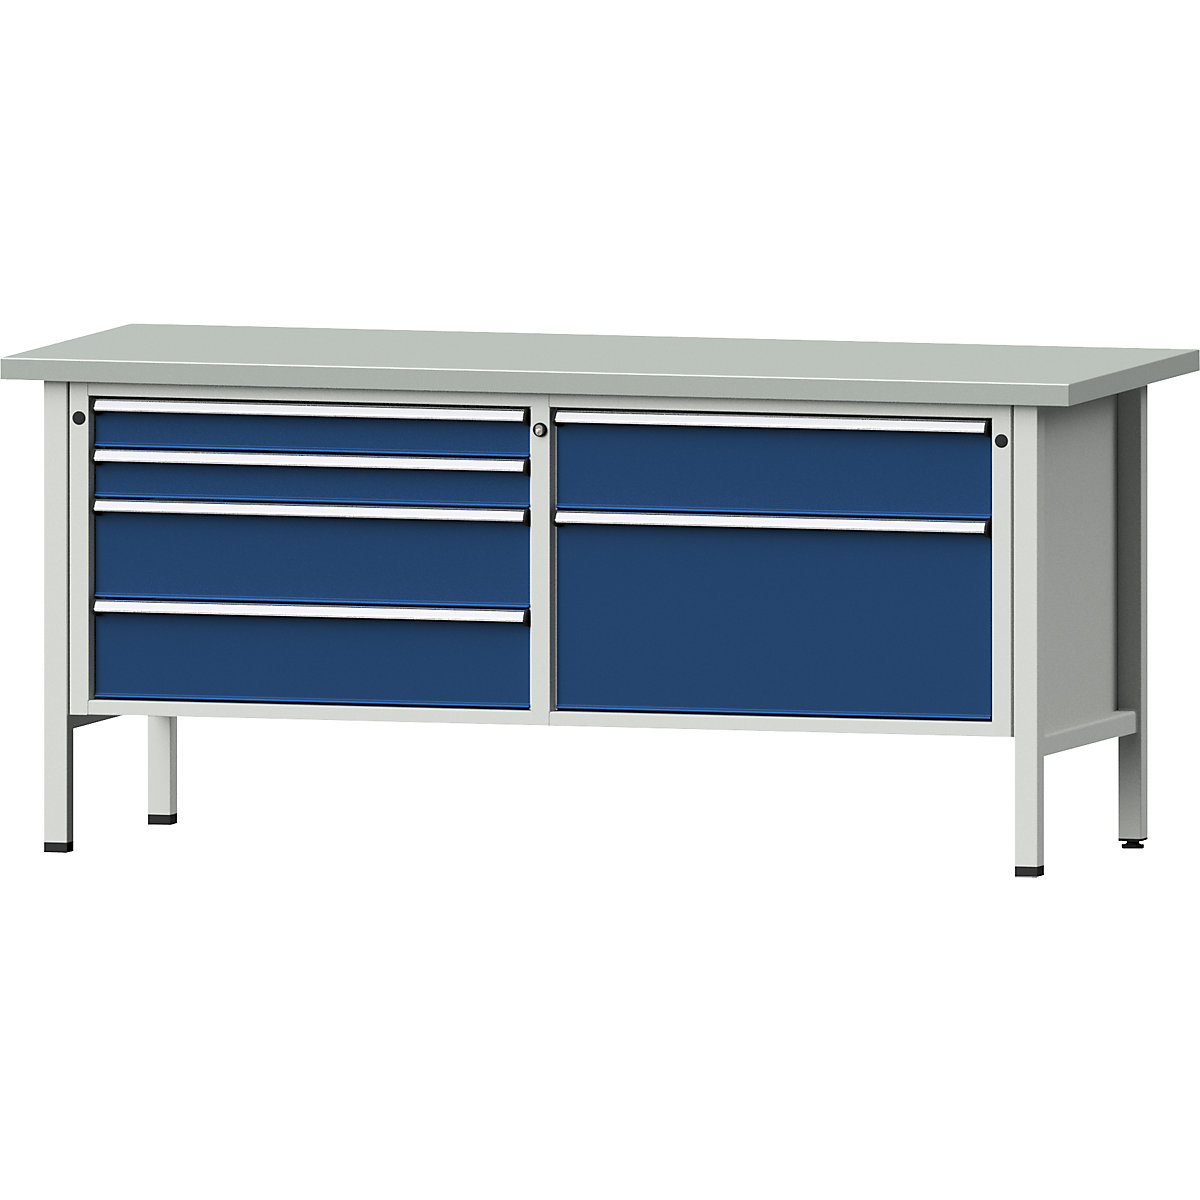 Workbenches 2000 mm wide, frame construction – ANKE, 6 drawers, sheet steel covered worktop, height 890 mm-9